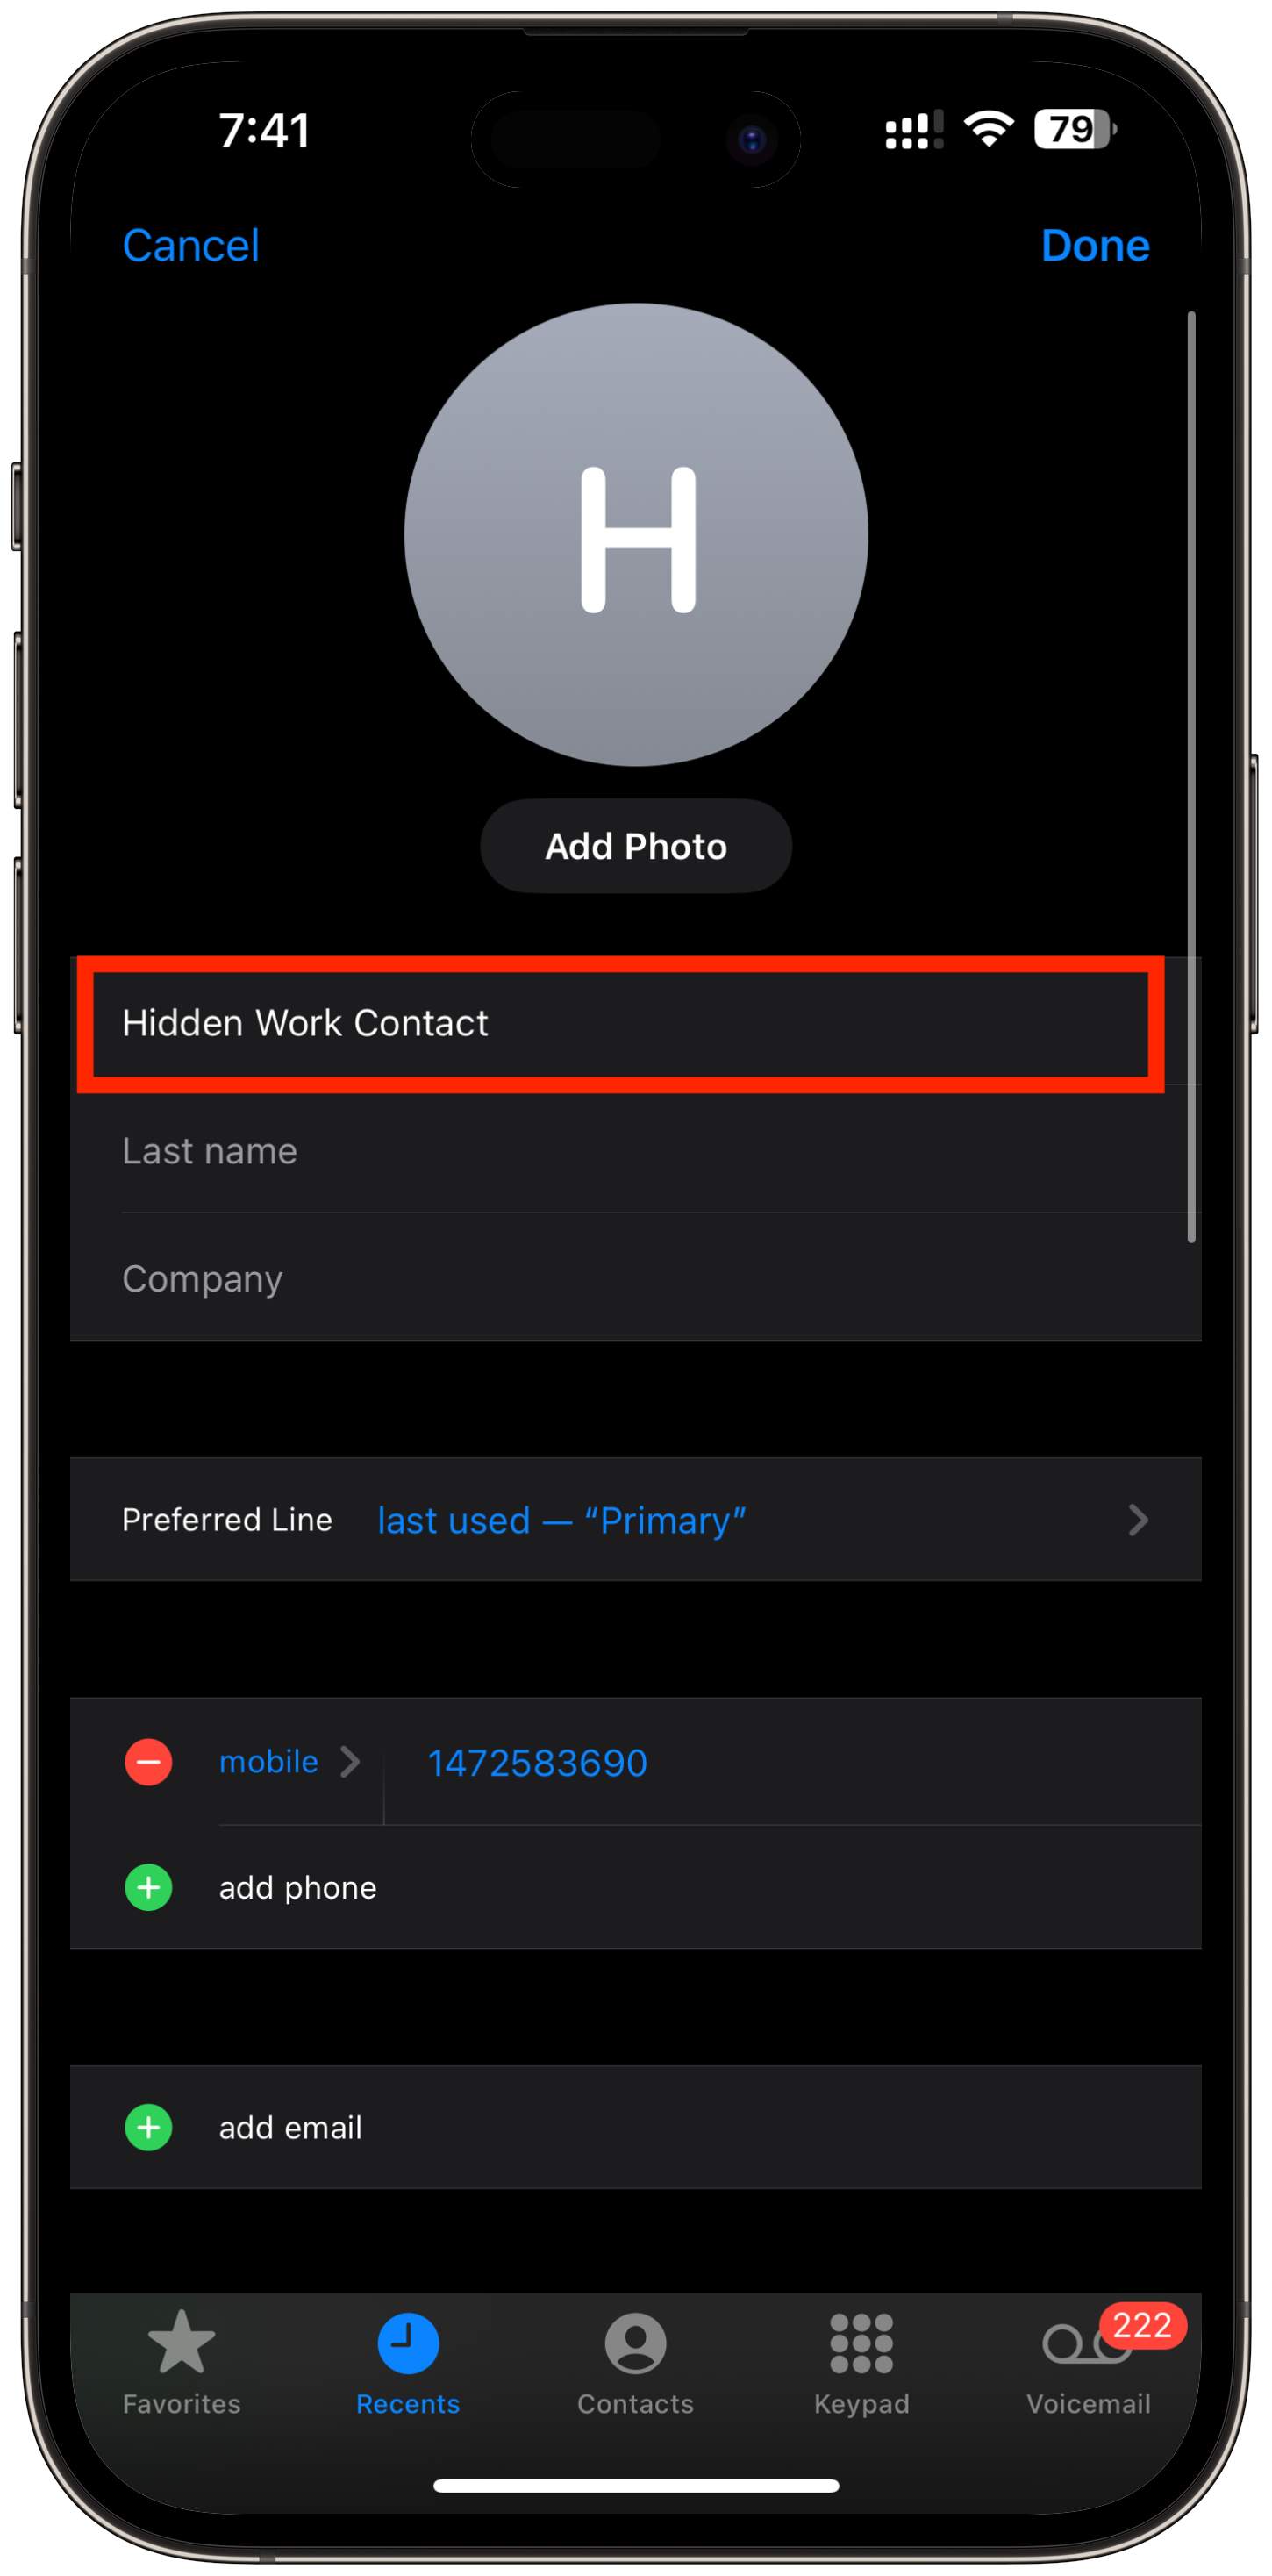 How to Hide Contacts on iPhone